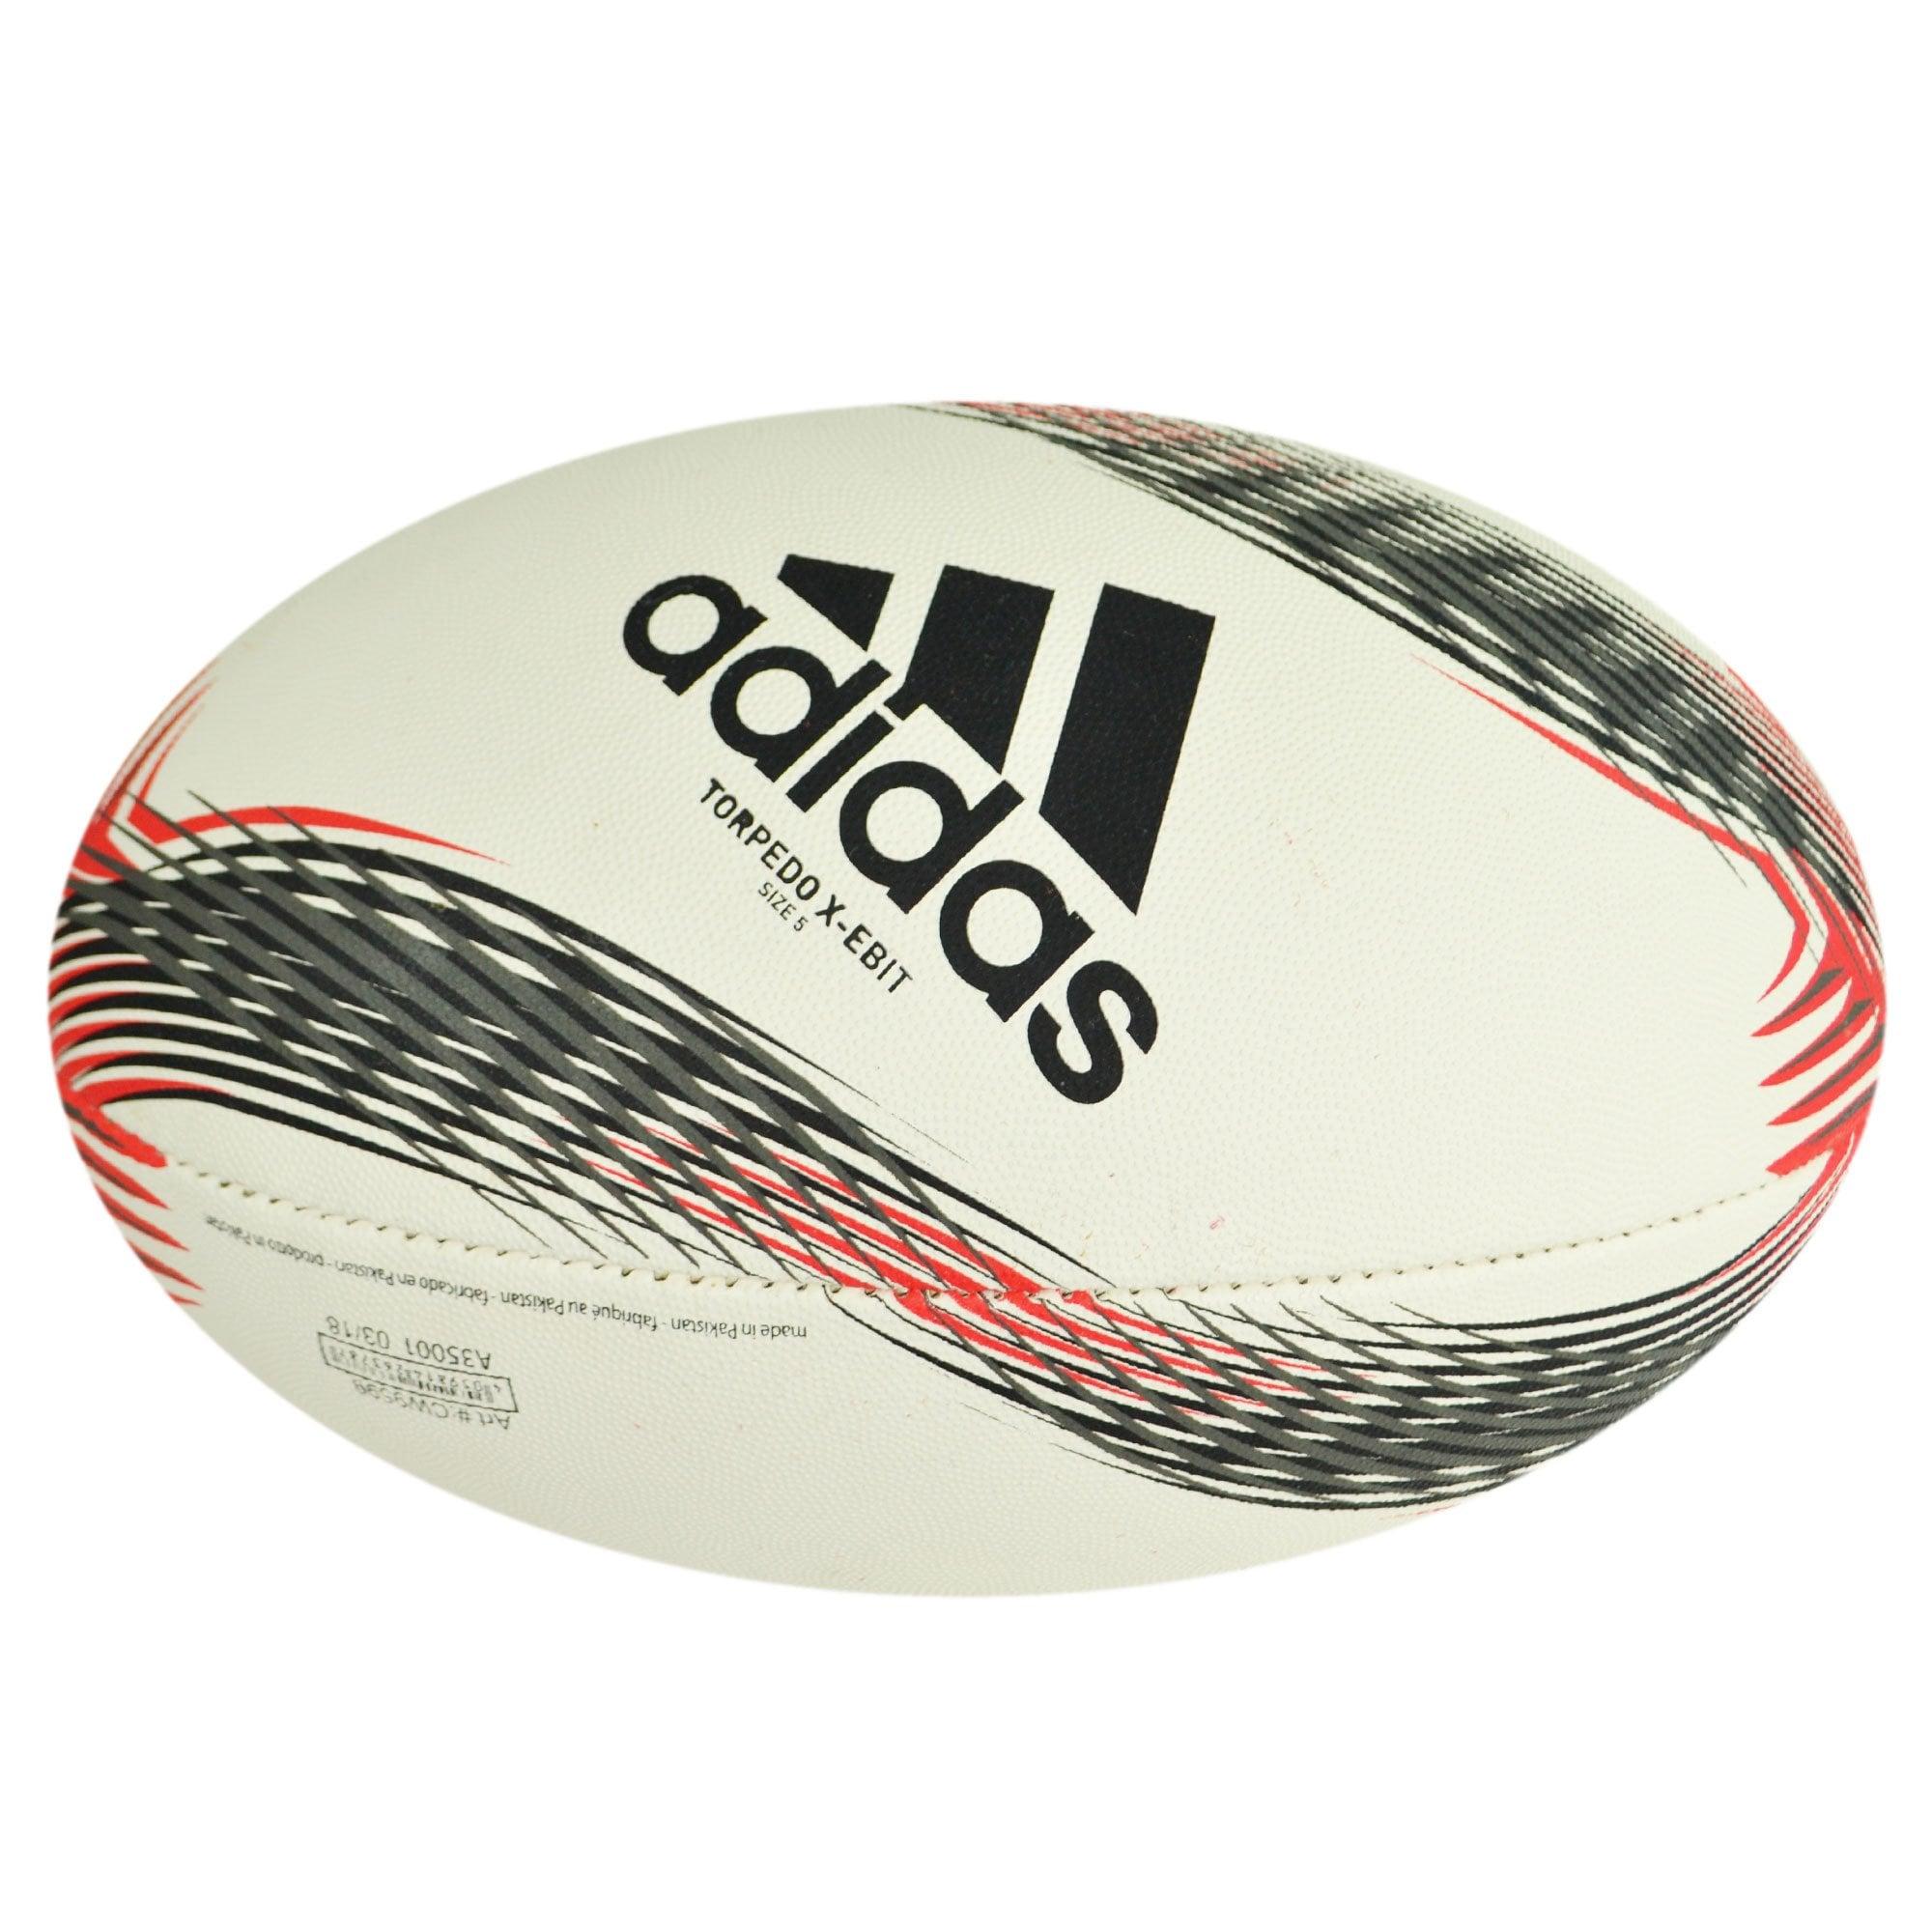 Red Ball White with X Logo - Torpedo X-Ebit Rugby Ball - White, Black and Red